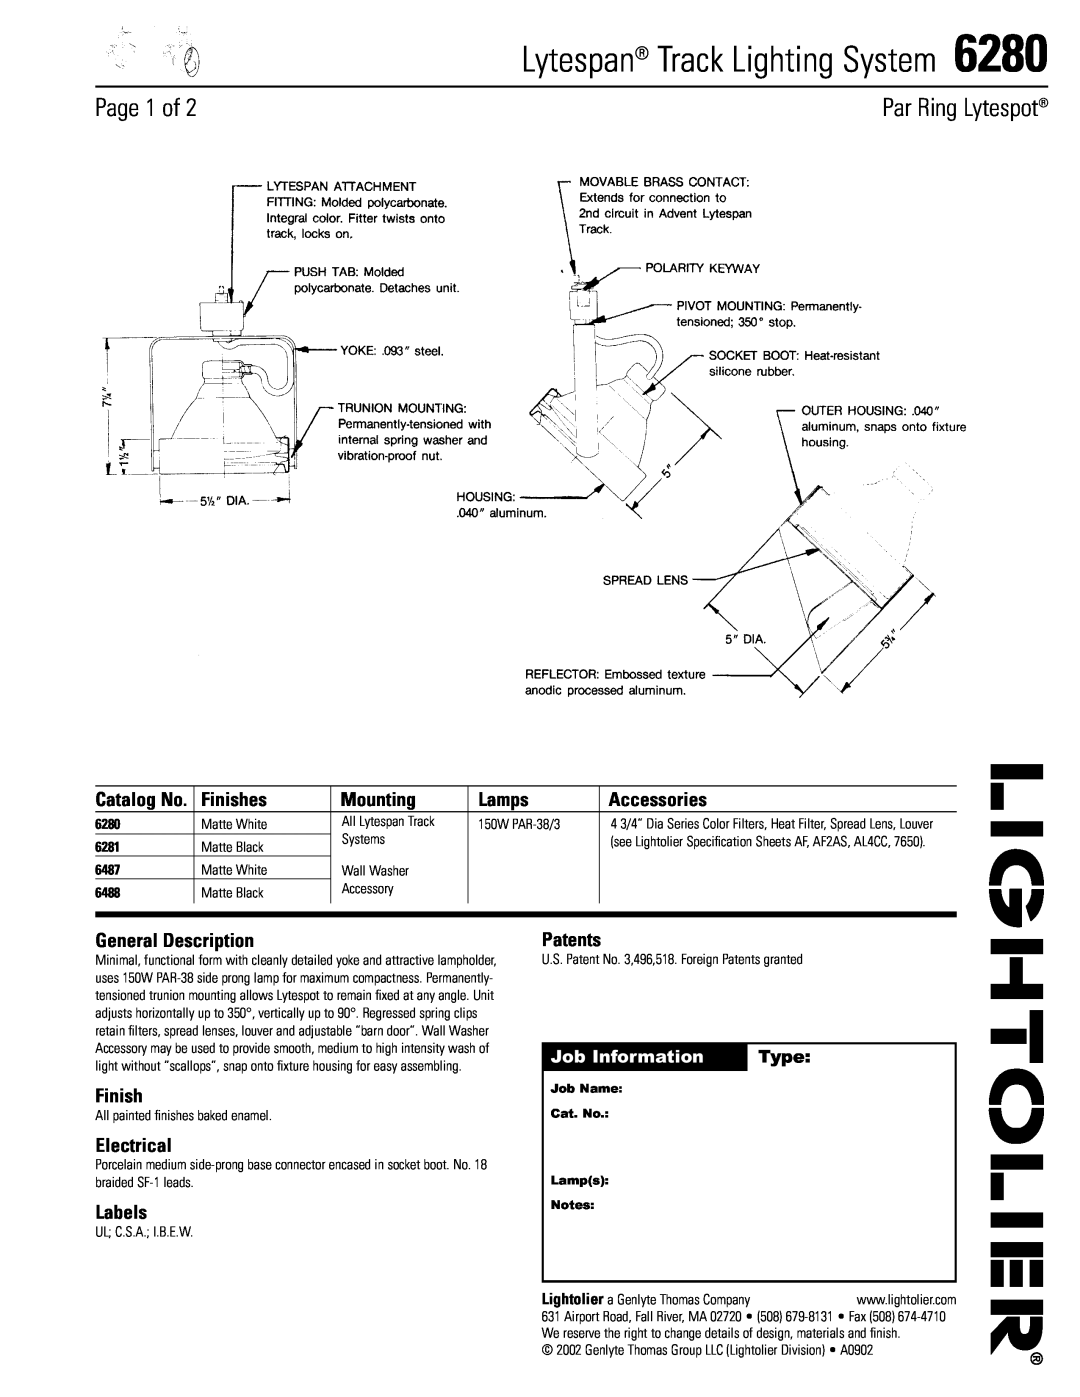 Lightolier 6280 specifications Lytespan Track Lighting System, Page 1 of, Par Ring Lytespot, Finishes, Mounting, Lamps 